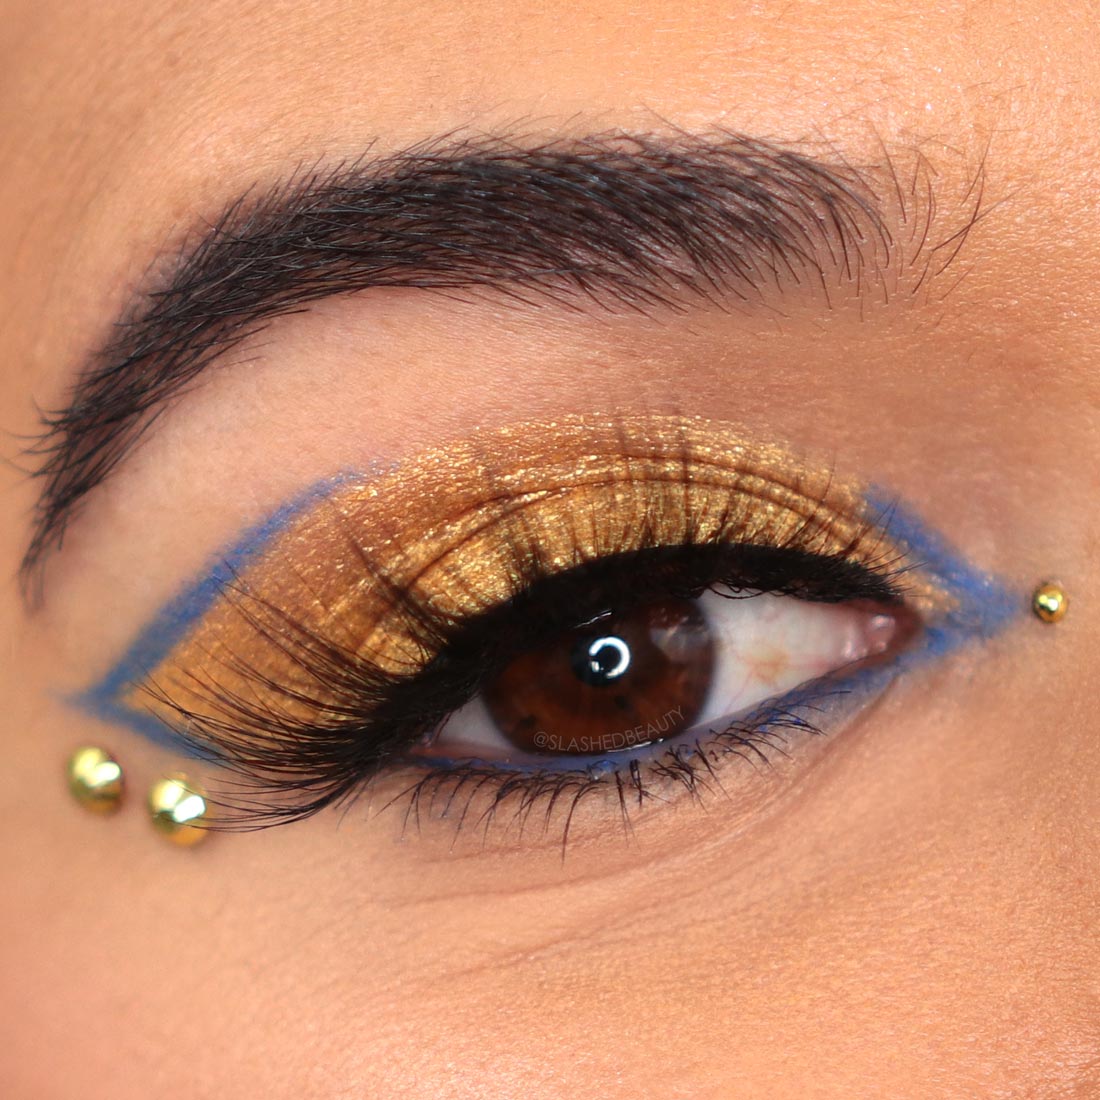 Close up of eye wearing a gold and blue graphic eyeliner look and eye gems | 5 Daring 2022 Beauty Trends to Try This Year | Slashed Beauty